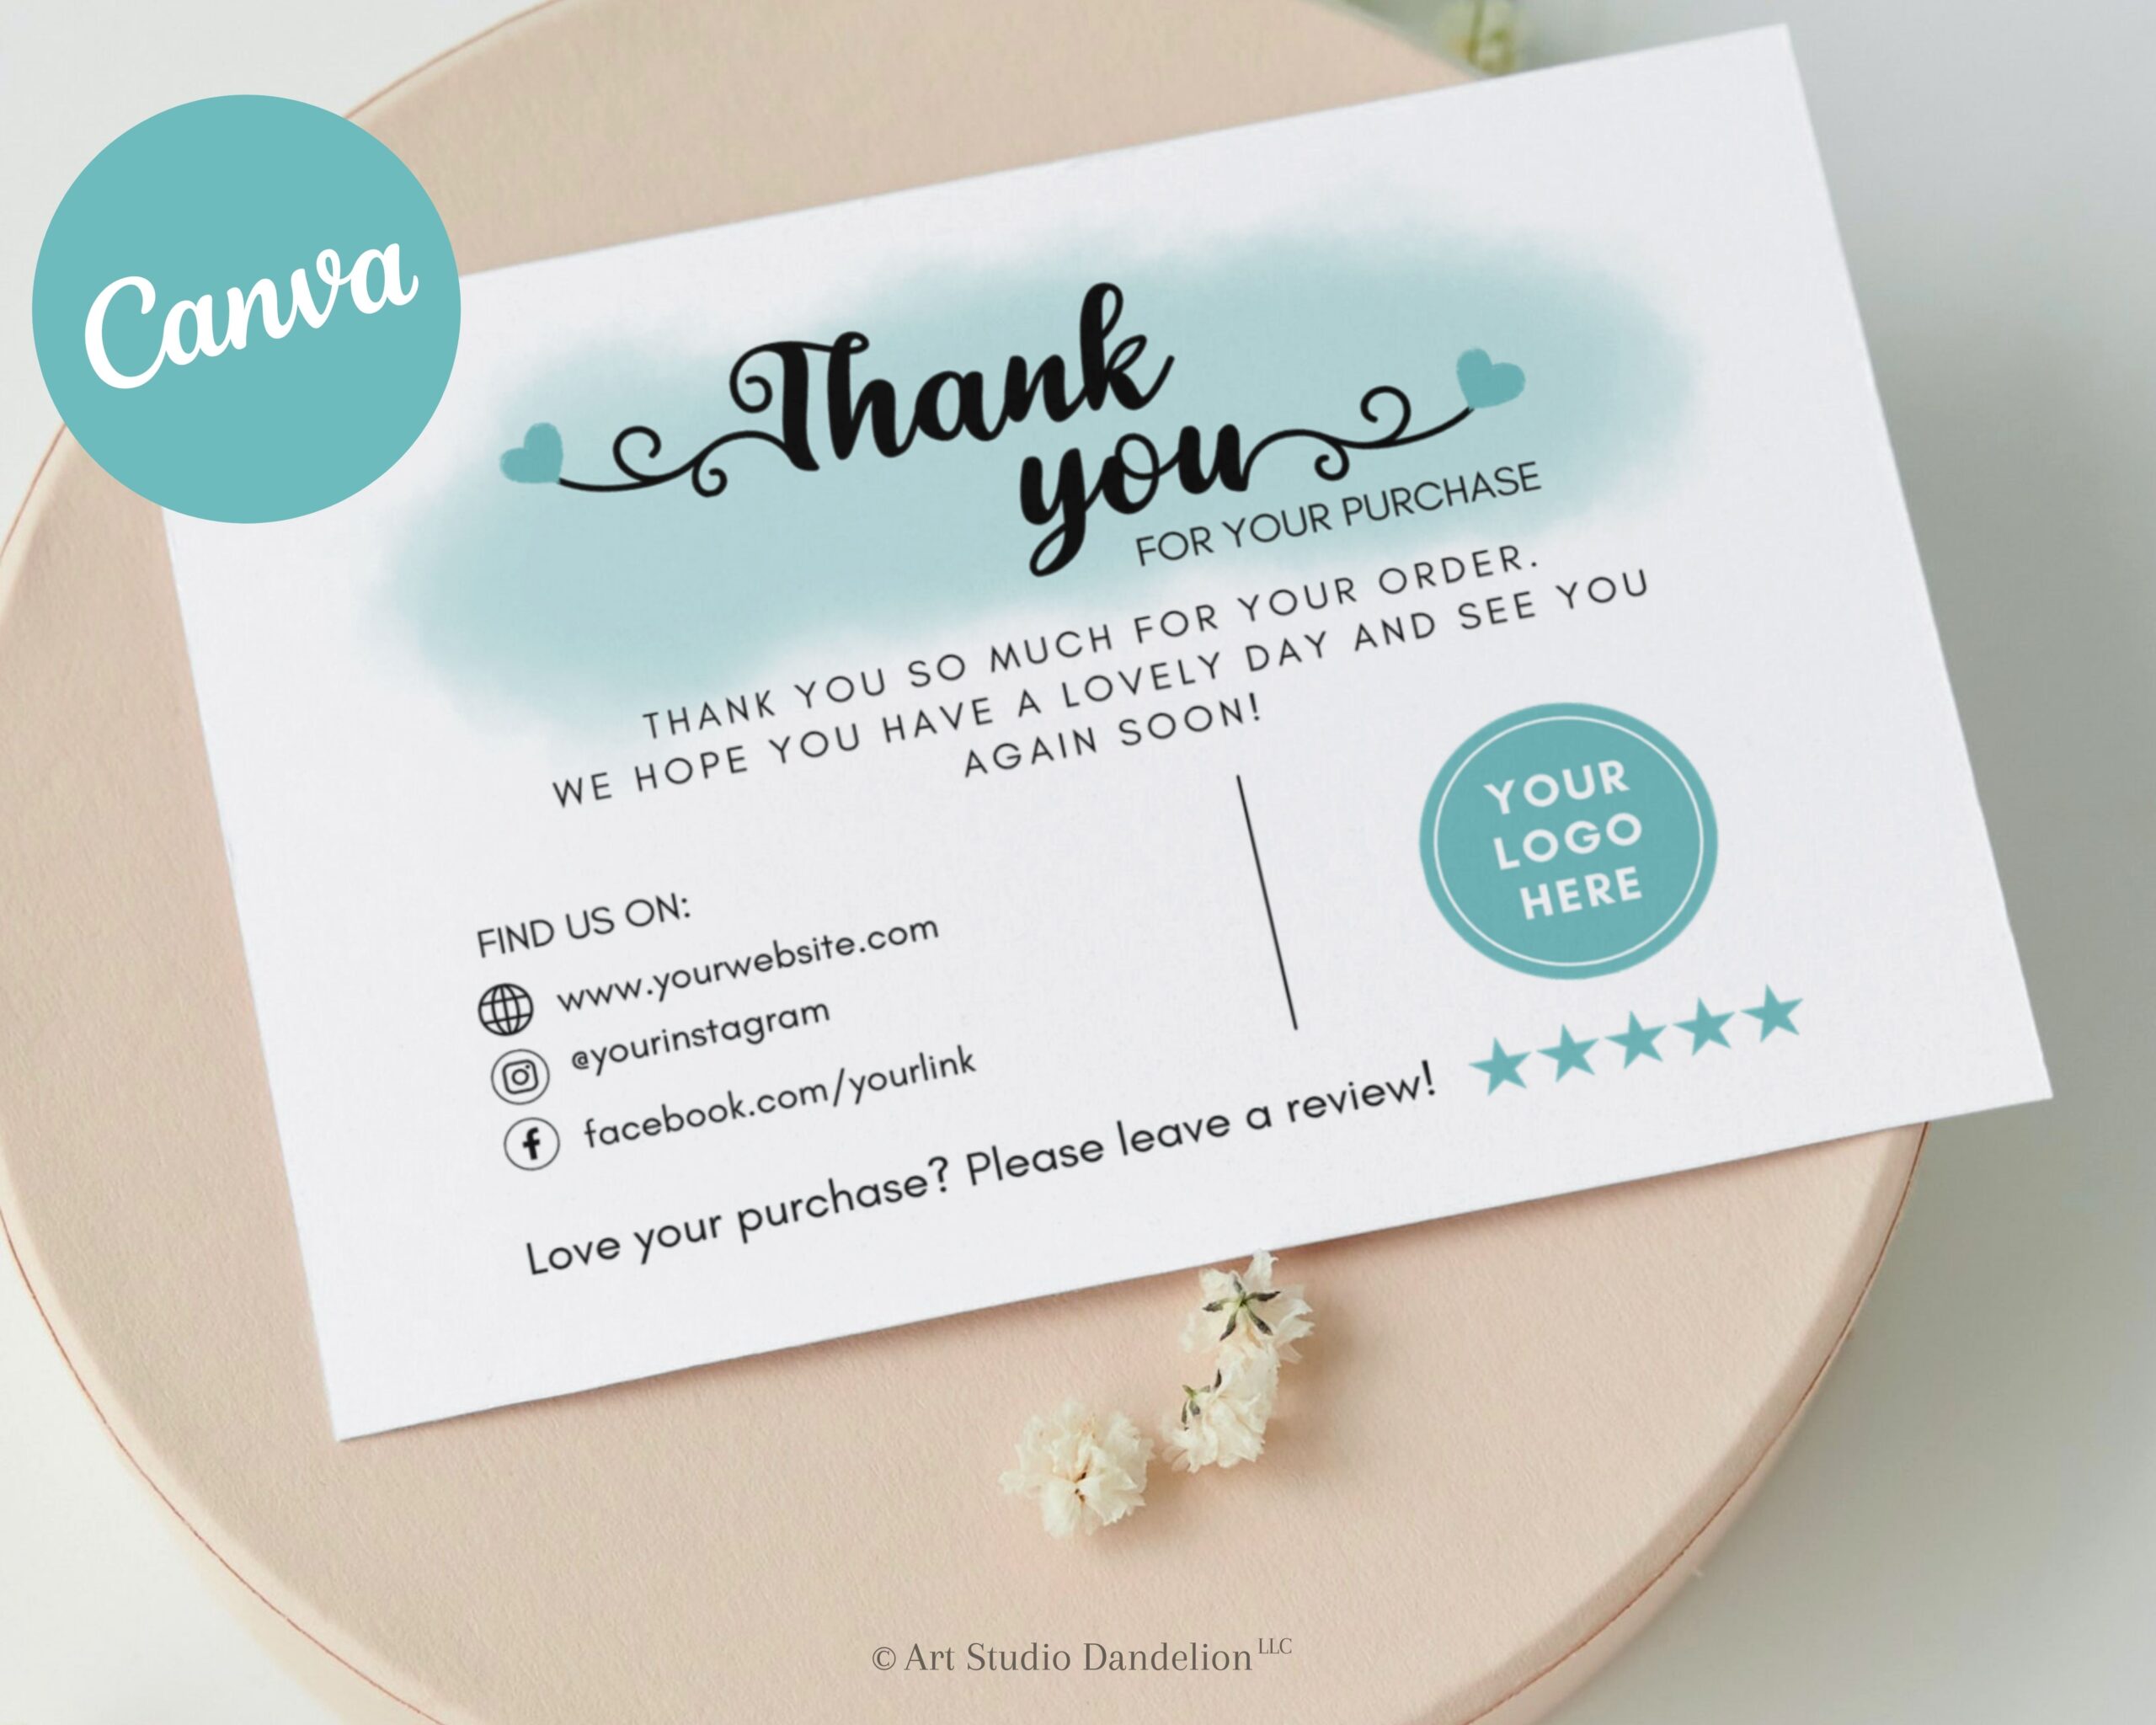 Thank You Business Card - Edit & Print - Etsy Small Business Thank You Card. Blue Watercolor Design. Print-Ready - Instant Access